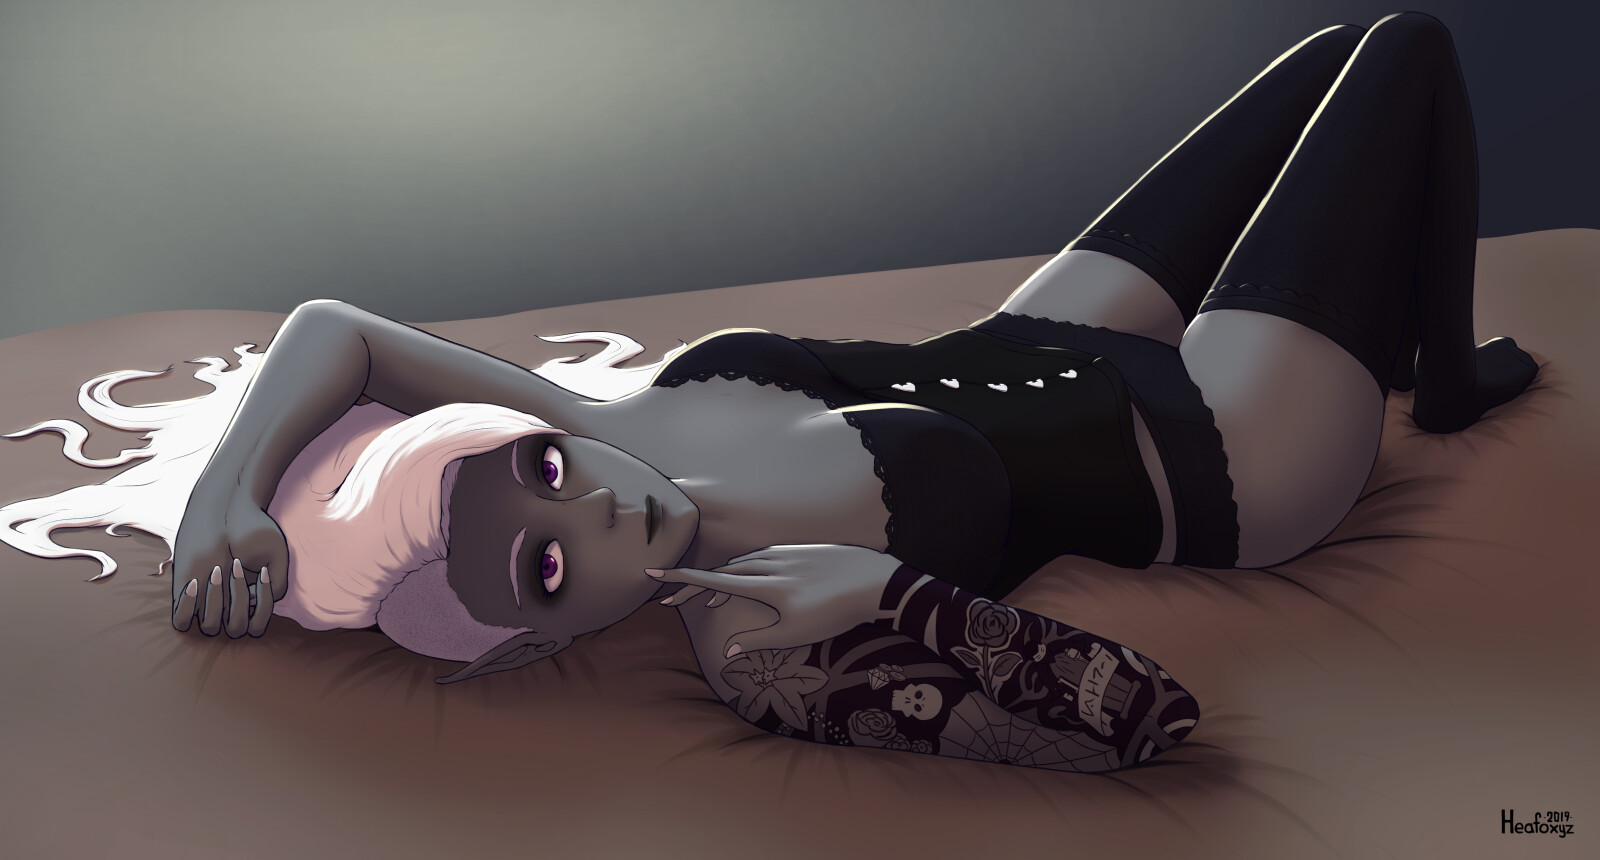 Commission for Nyma of their drow elf OC Inith. 